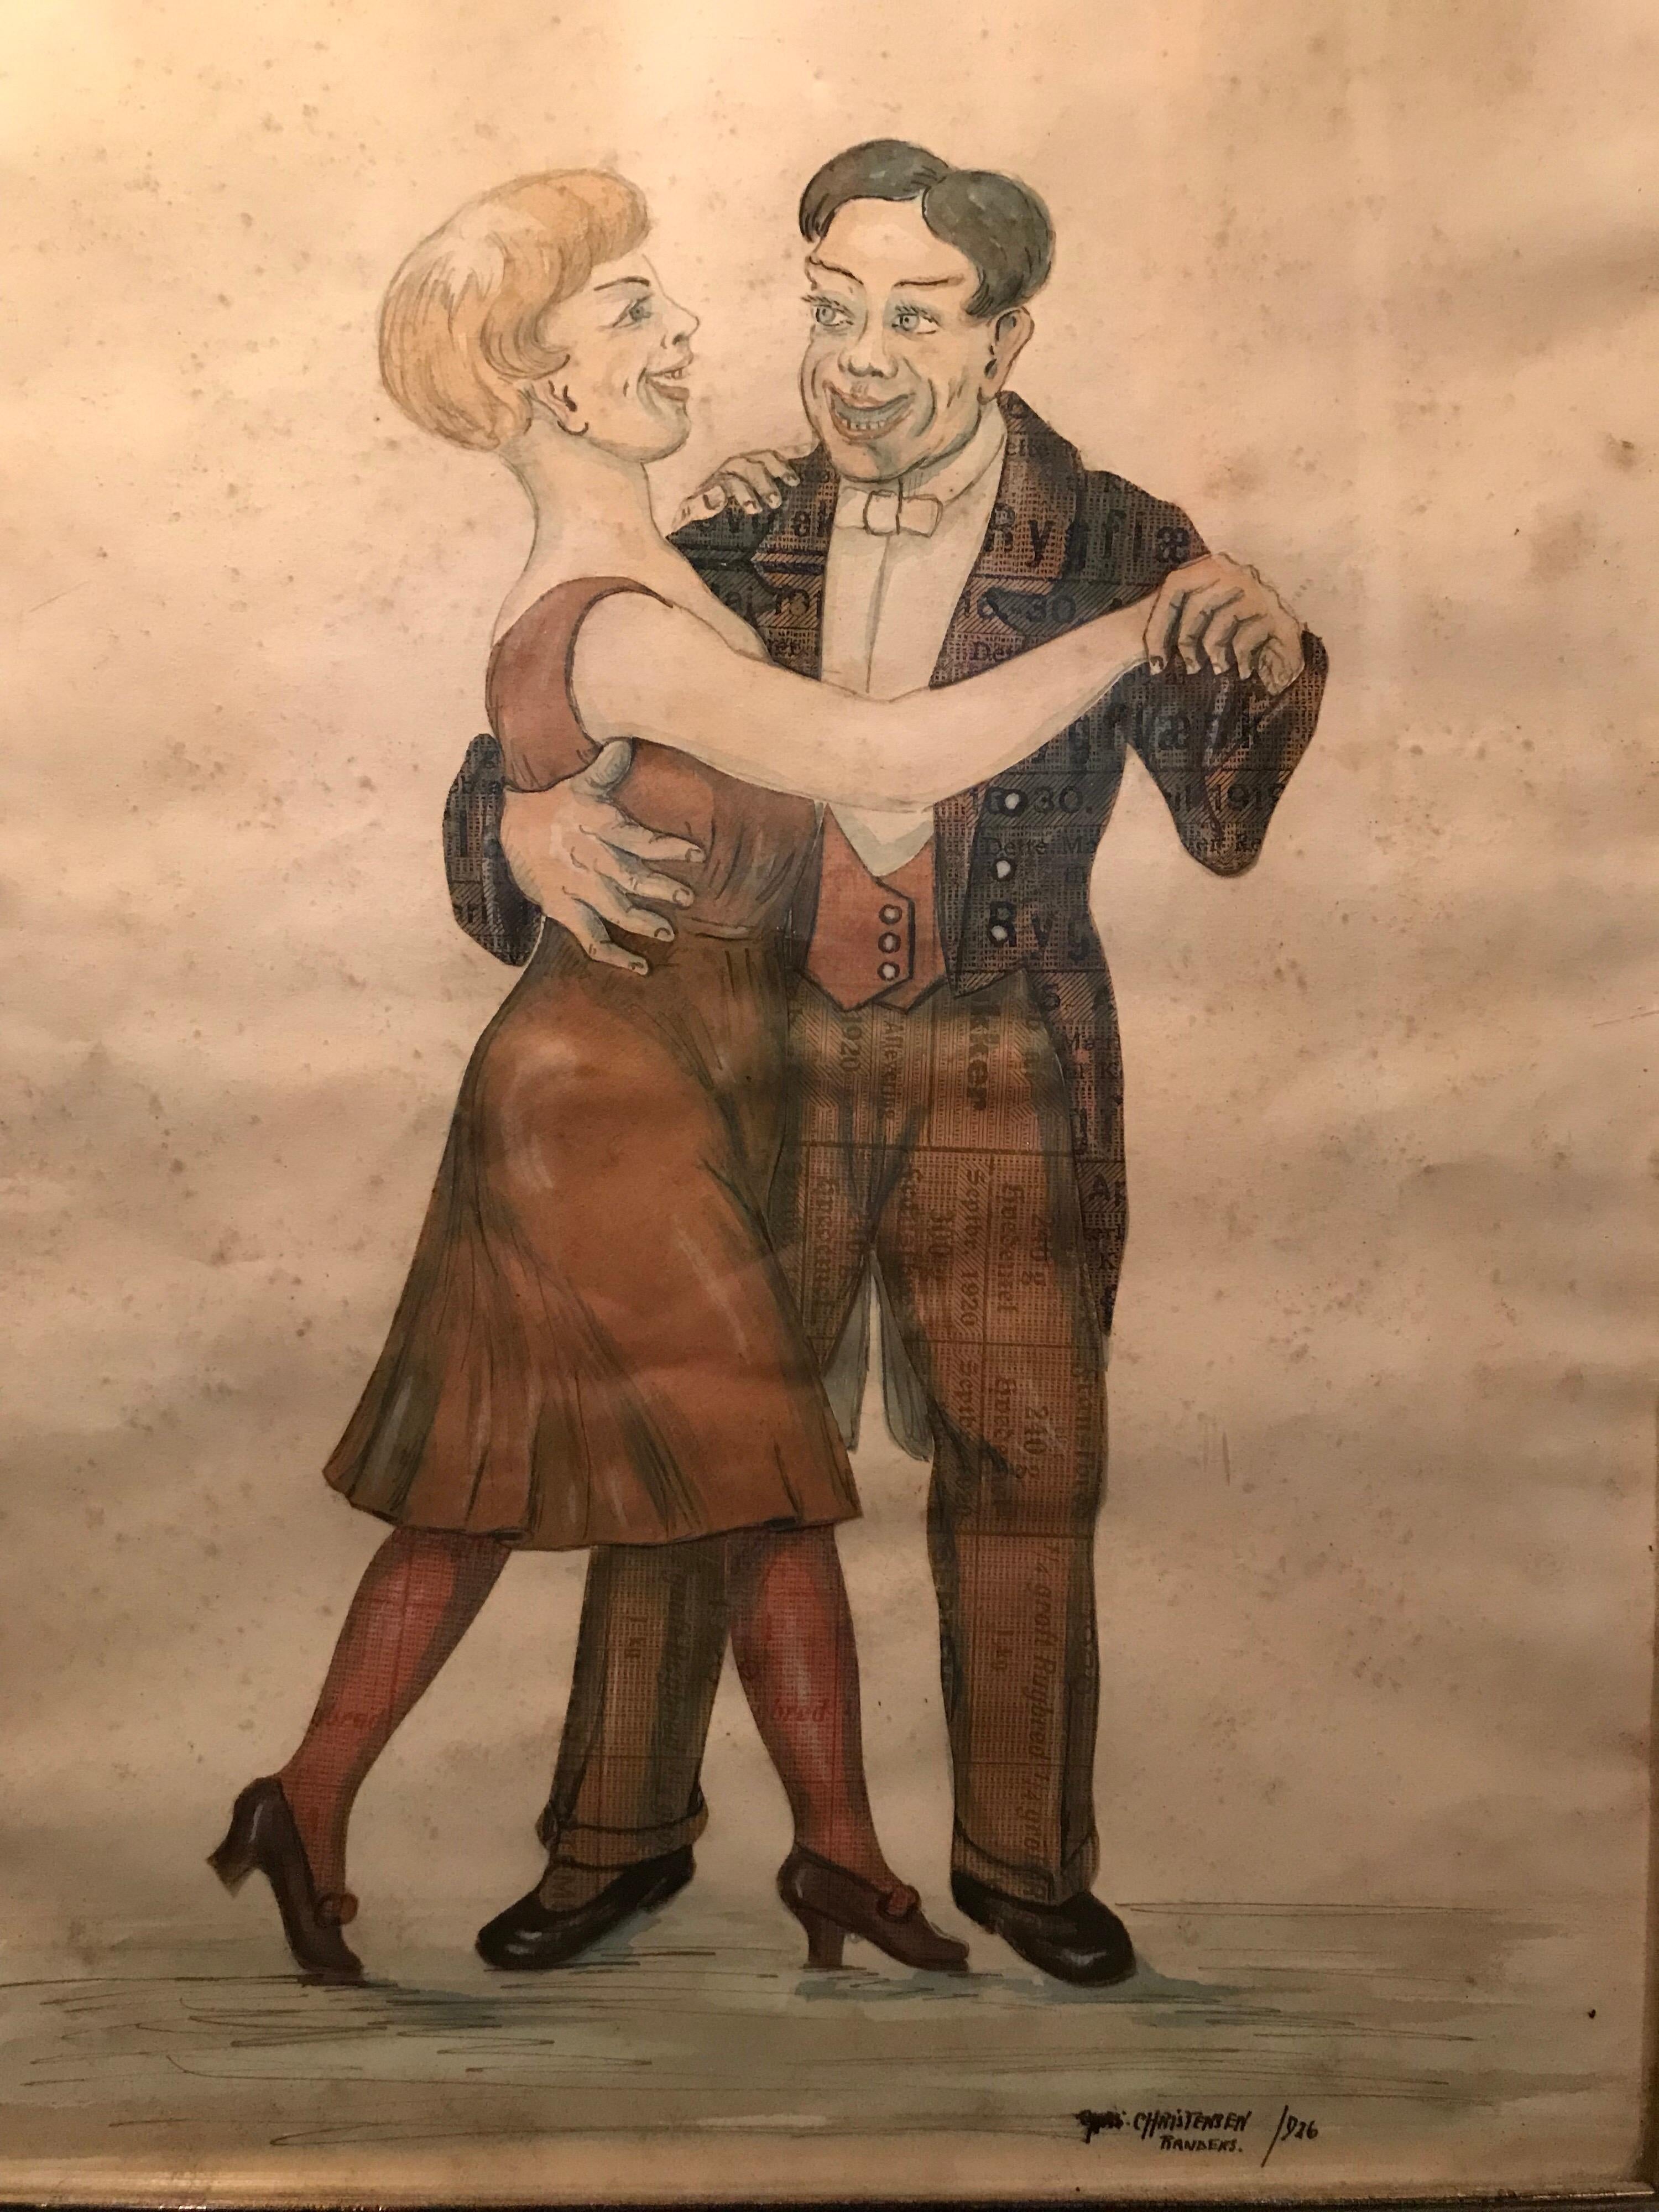 Lithographic print on paper from the 1930s in the original frame.
This print has never been out of the frame. 
Made in Denmark by an unknown Danish artist.